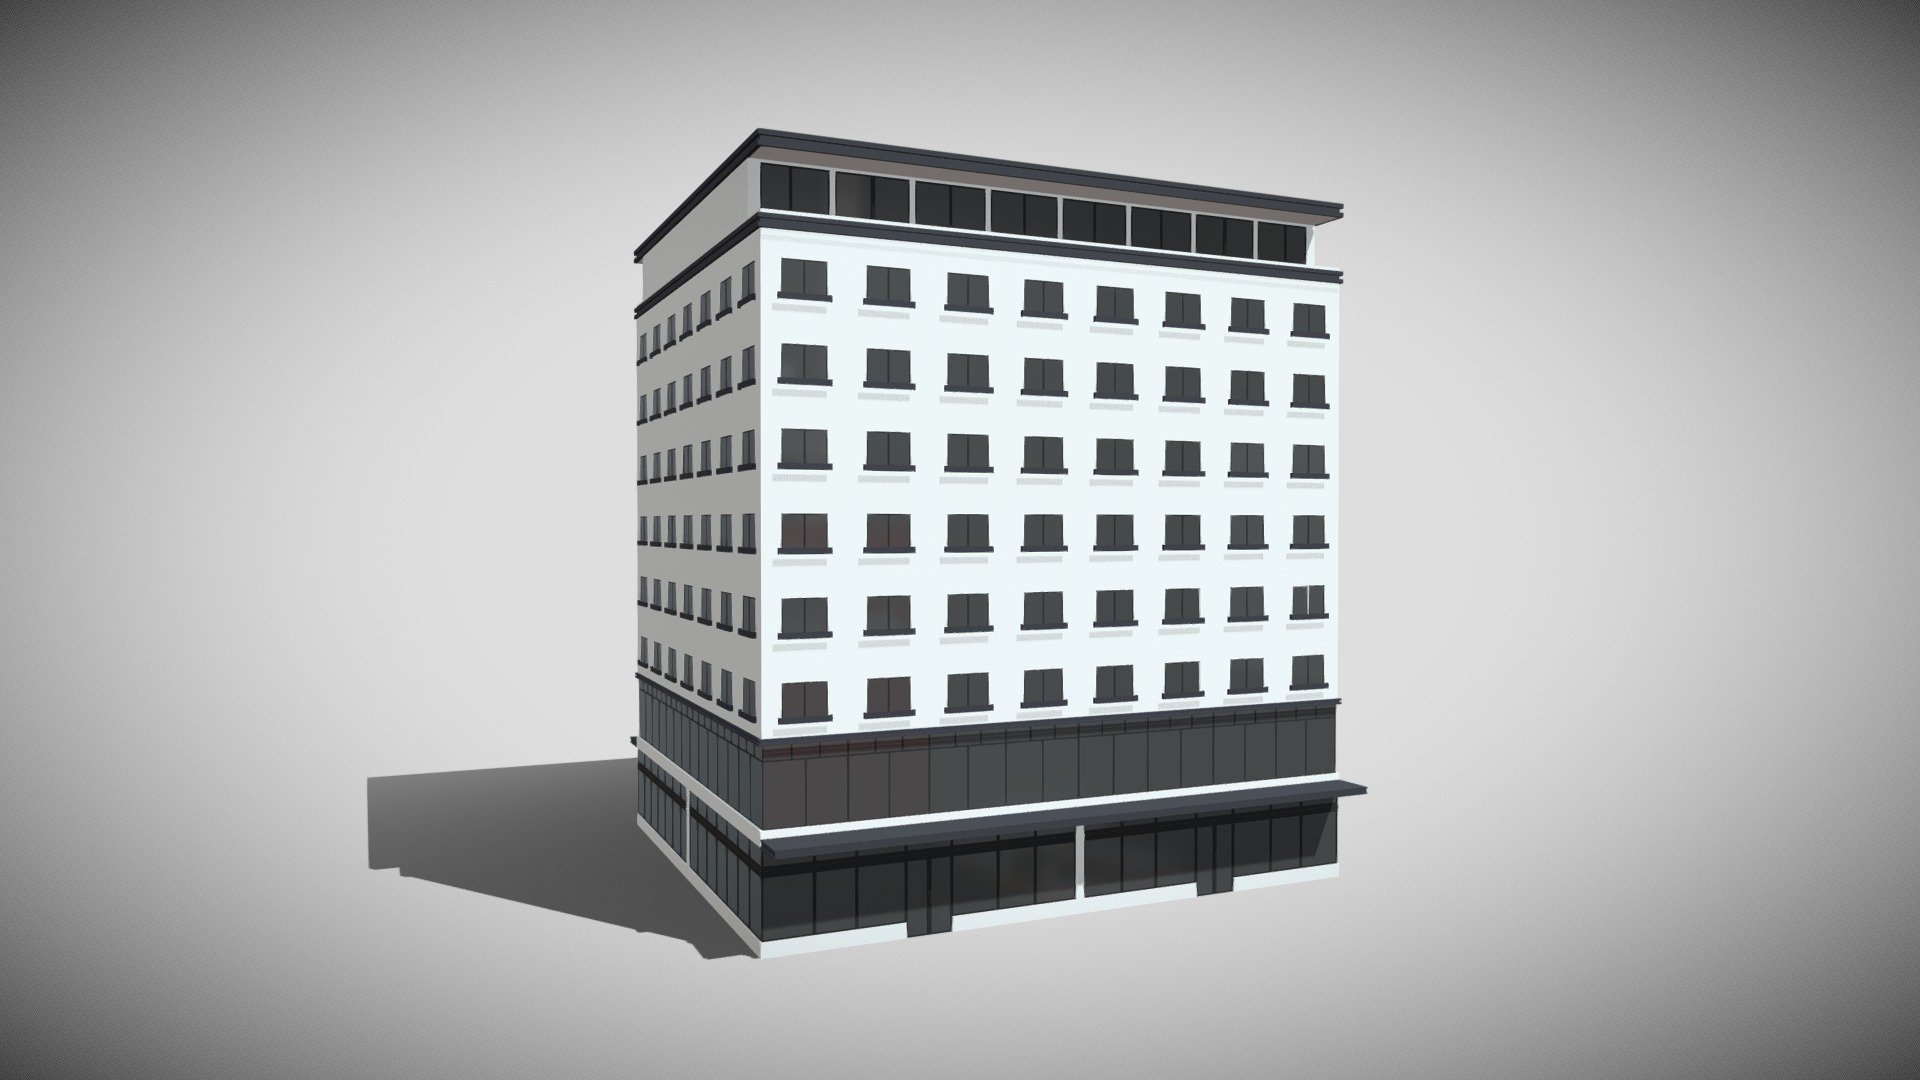 Detailed model of a Commercial Building with no interior, modeled in Cinema 4D.The model was created using approximate real world dimensions.

The model has 15,404 polys and 20,151 vertices.

An additional file has been provided containing the original Cinema 4D project files and other 3d export files such as 3ds, fbx and obj 3d model